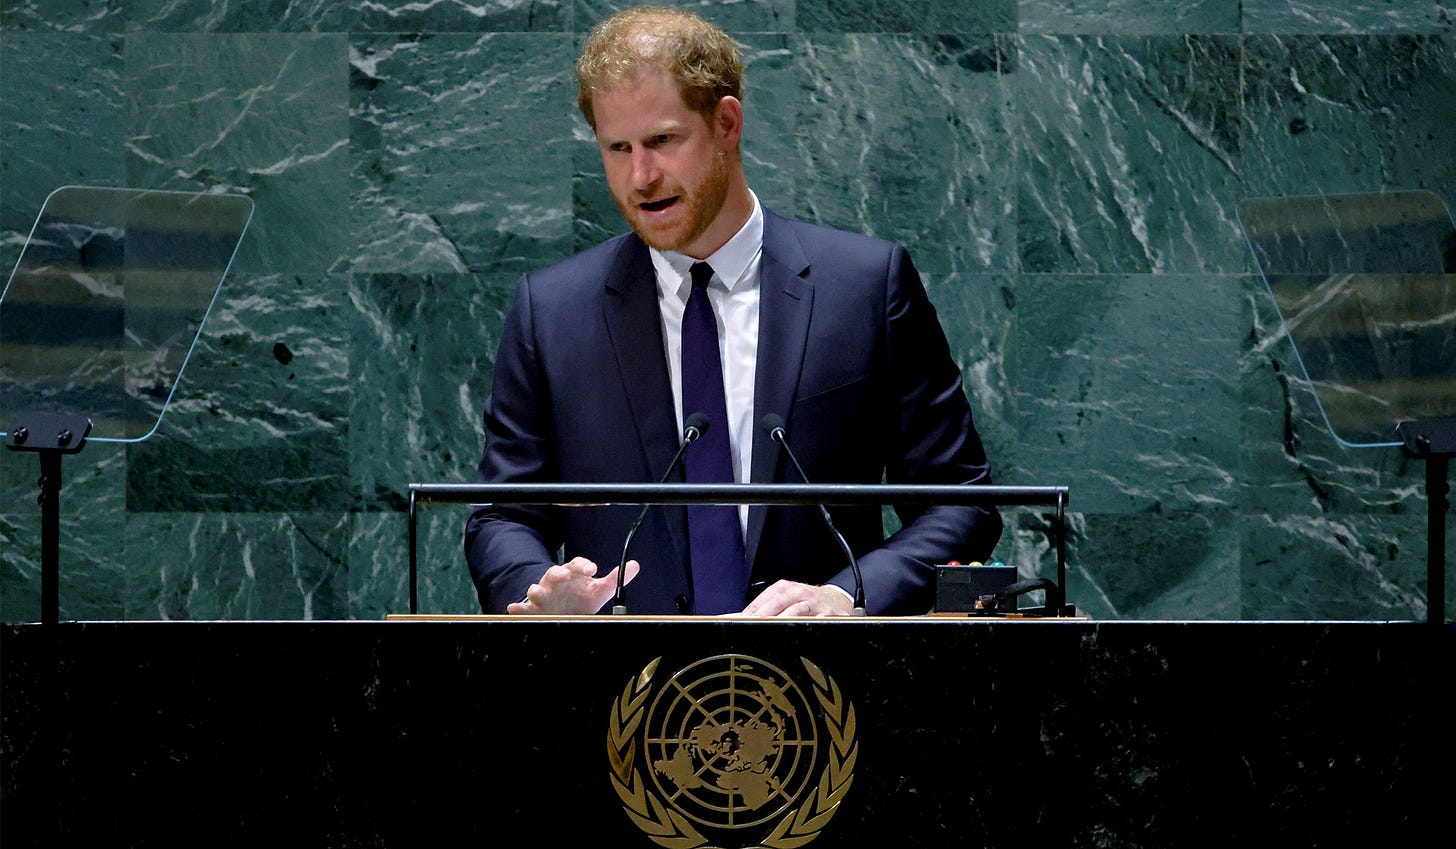 Prince Harry Laments 'Rolling Back of Constitutional Rights' in the U.S.  during U.N. Speech | National Review